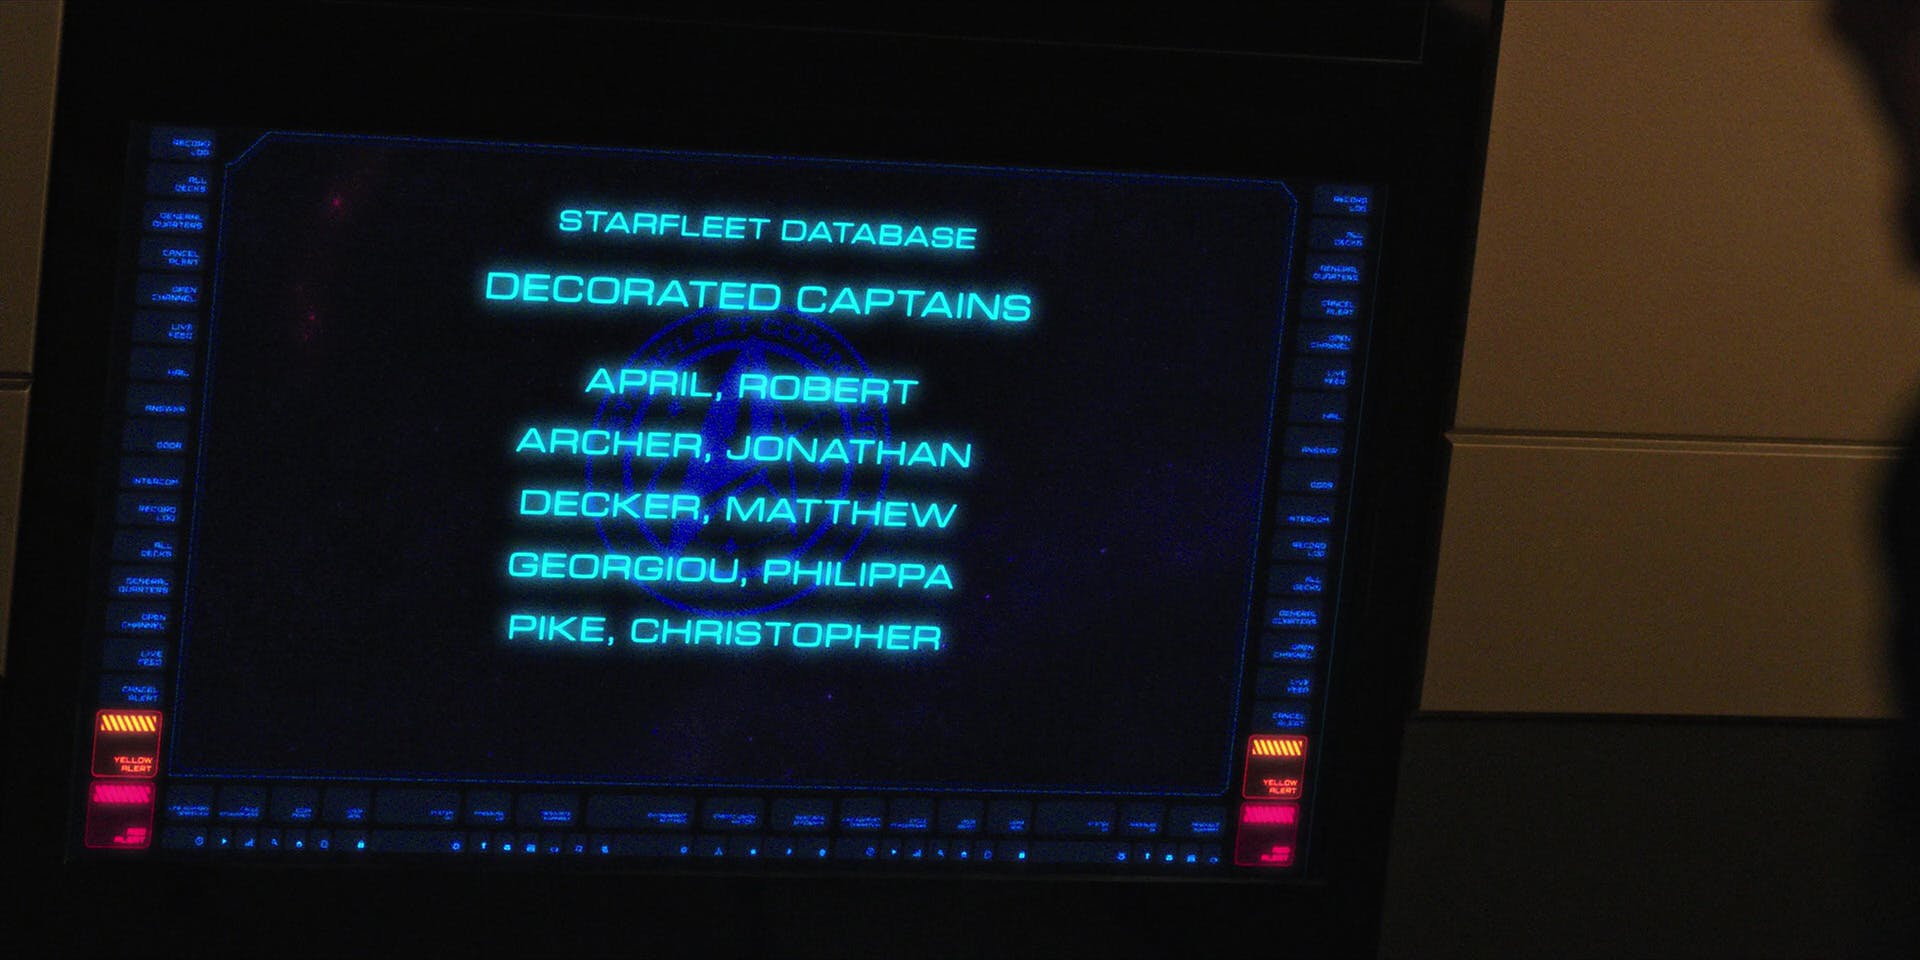 In Lorca's ready room, Saru asks the ship's computer to pull up Starfleet's database of the most decorated captains, which includes Robert April, Jonathan Archer, Matthew Decker, Philippa Georgiou, and Christopher Pike in 'Choose Your Pain'